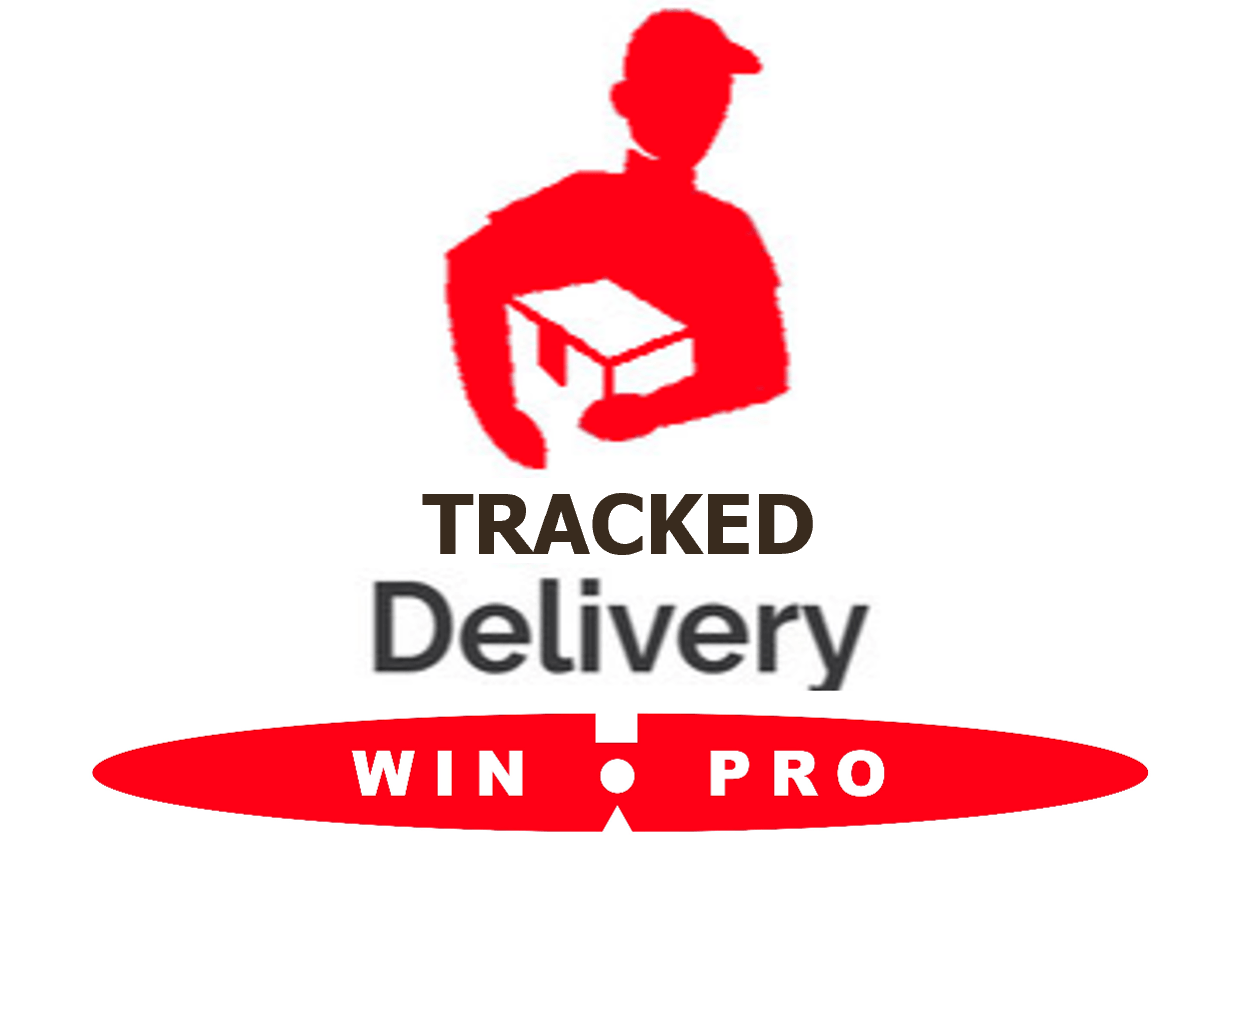 Win-Pro Delivery Service Top-up Tracked Shipping (With URL live tracking link) - Buy Singapore